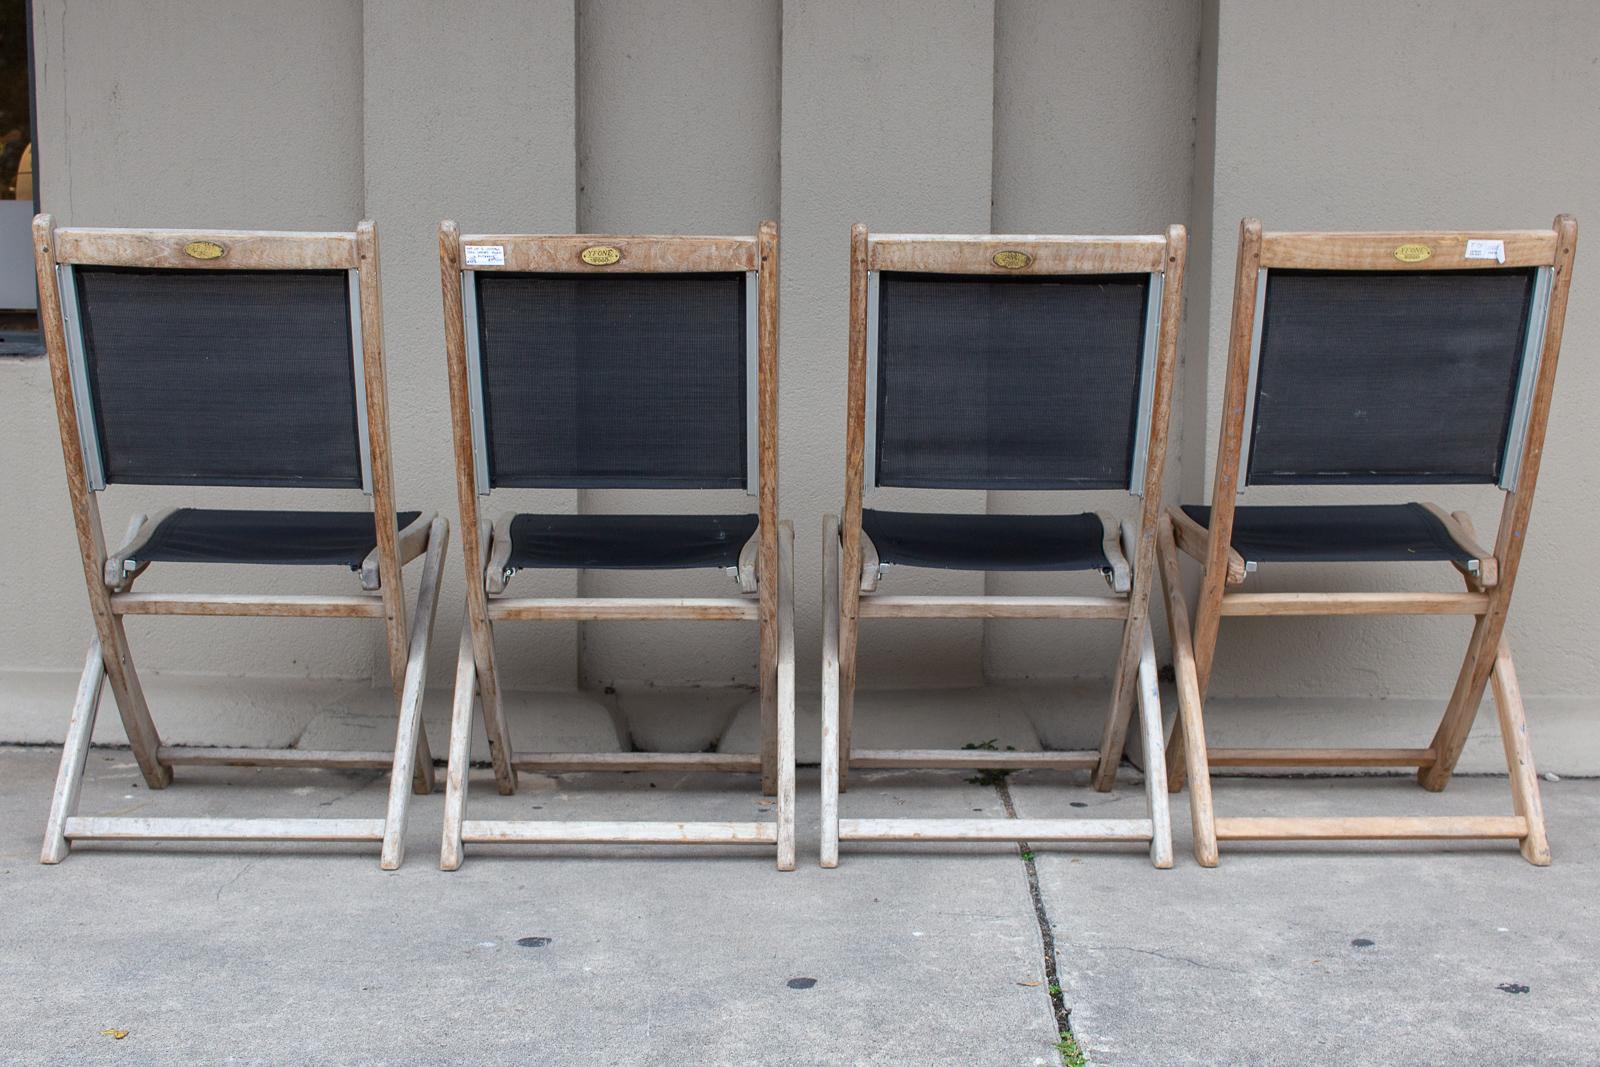 French Set of Four Vintage Teak and Nylon Folding Outdoor Chairs Found in France